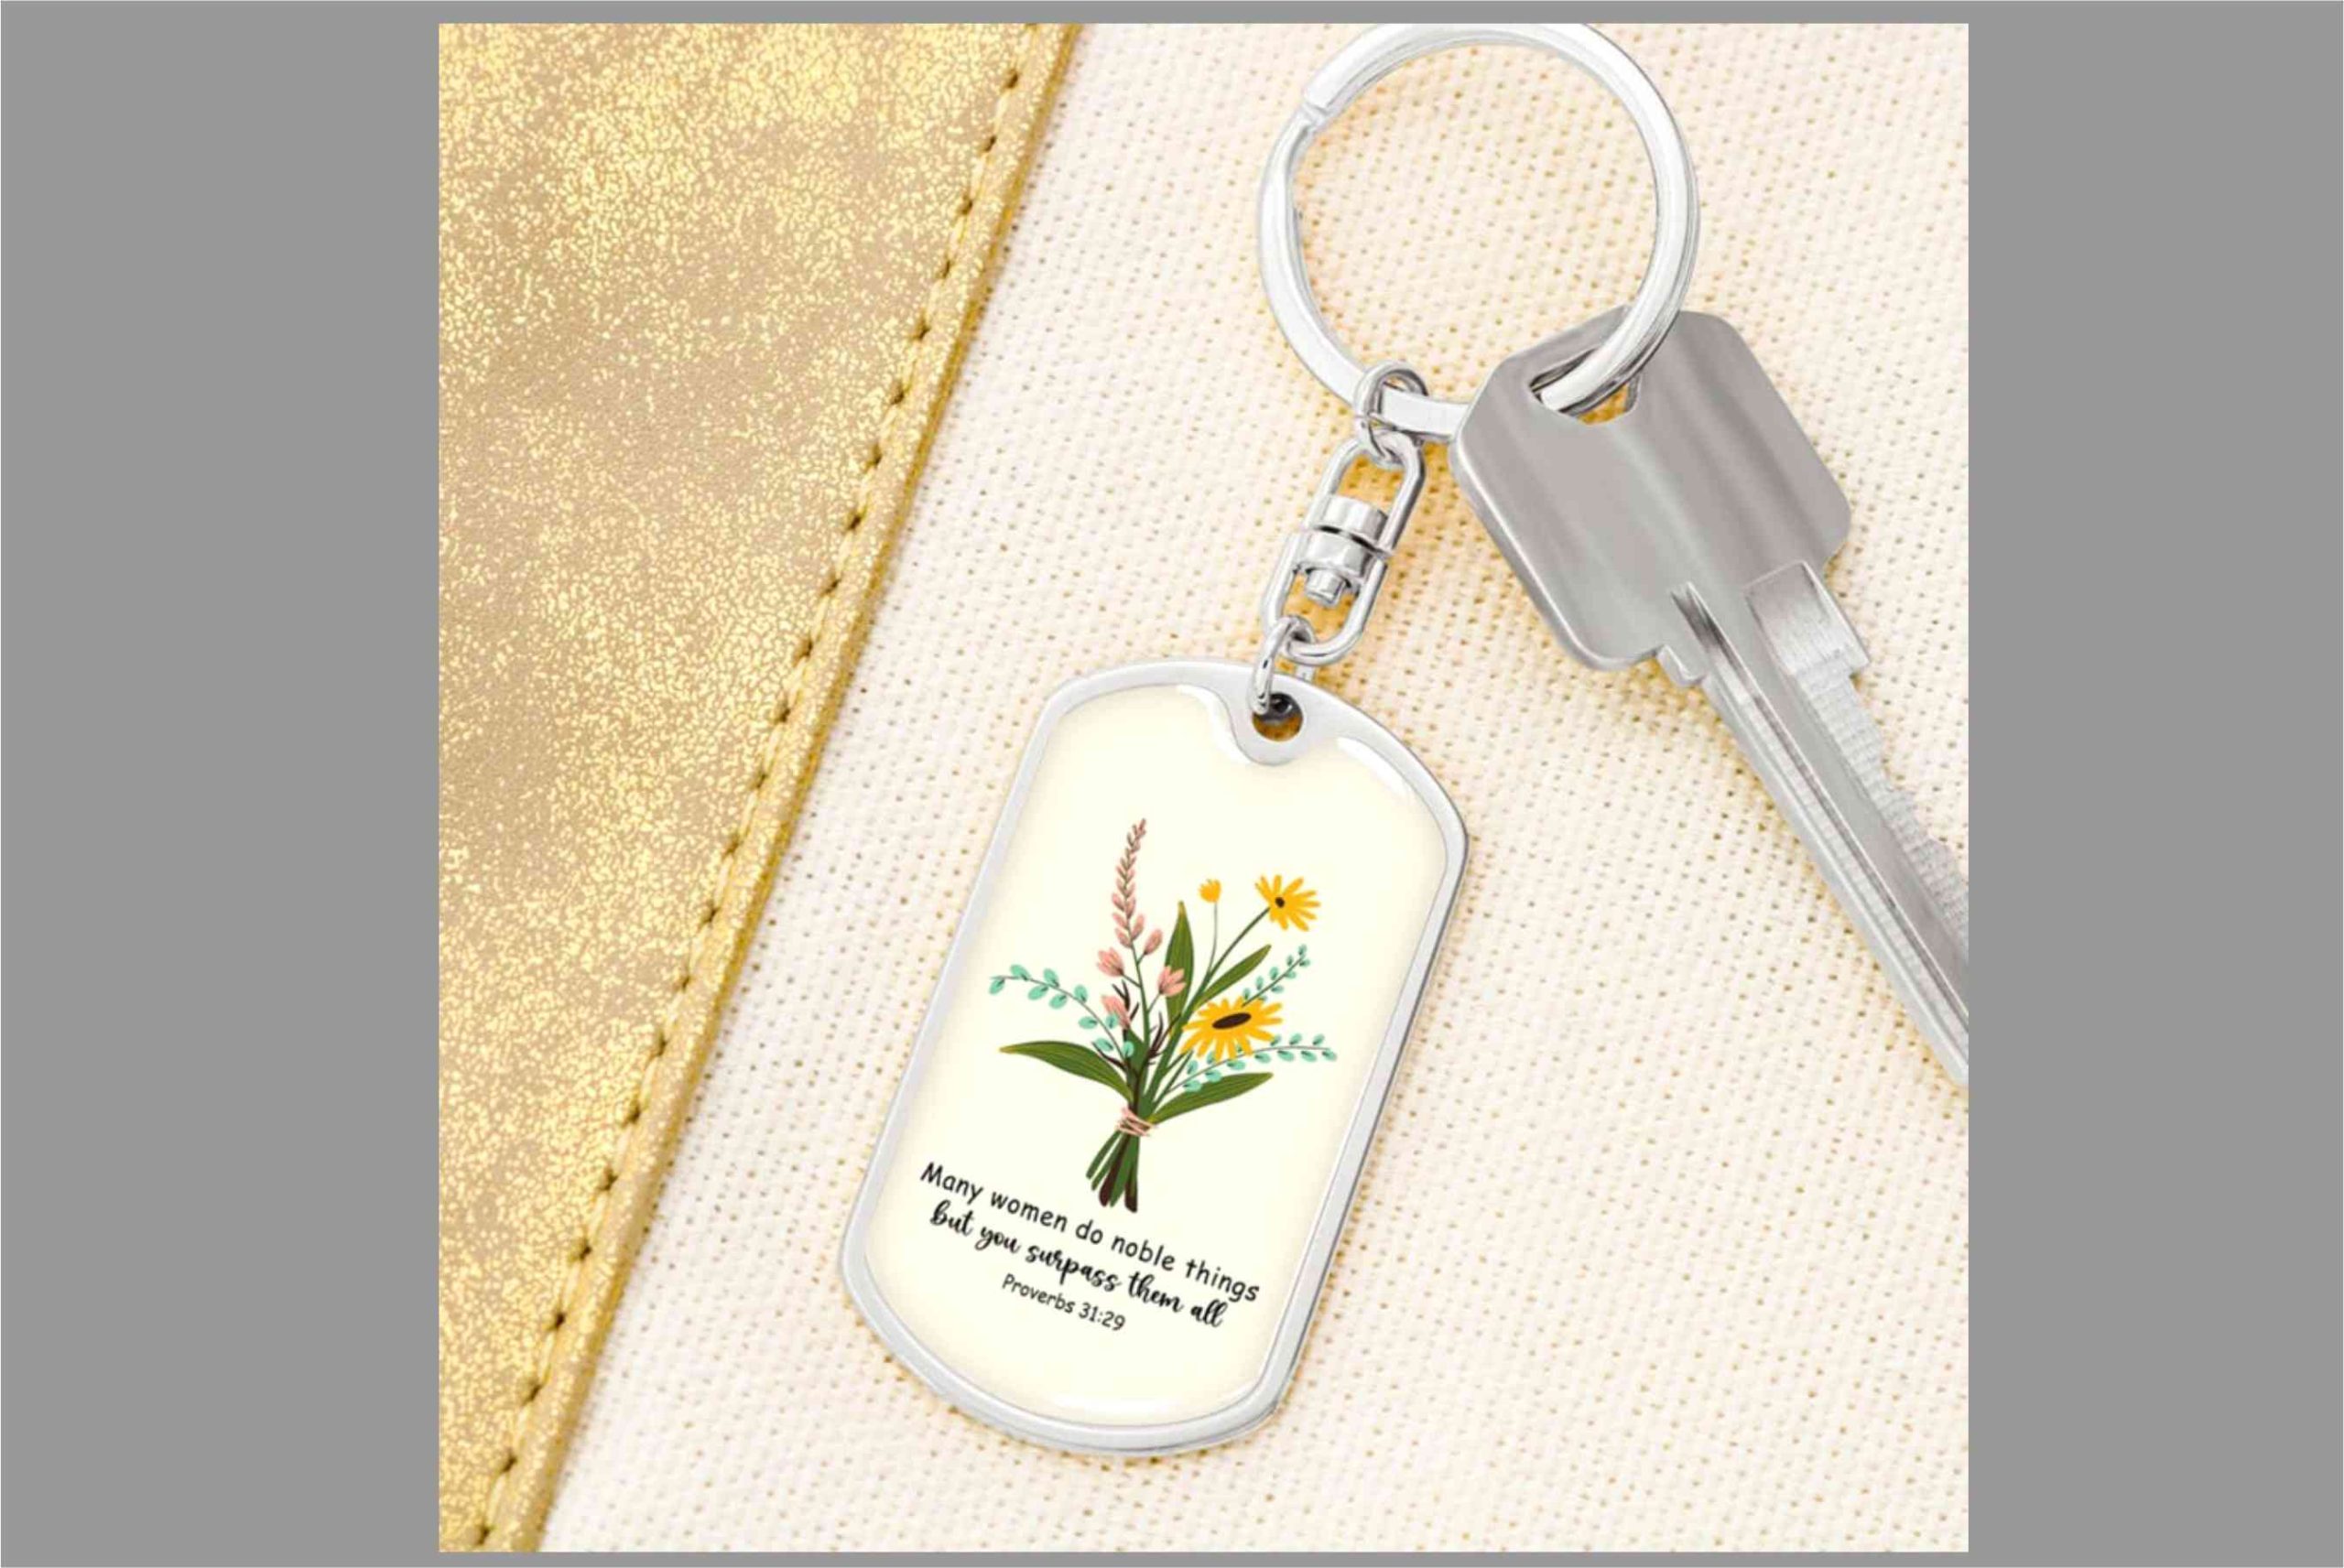 Many Women Do Noble Things Proverbs 31:29 Keychain